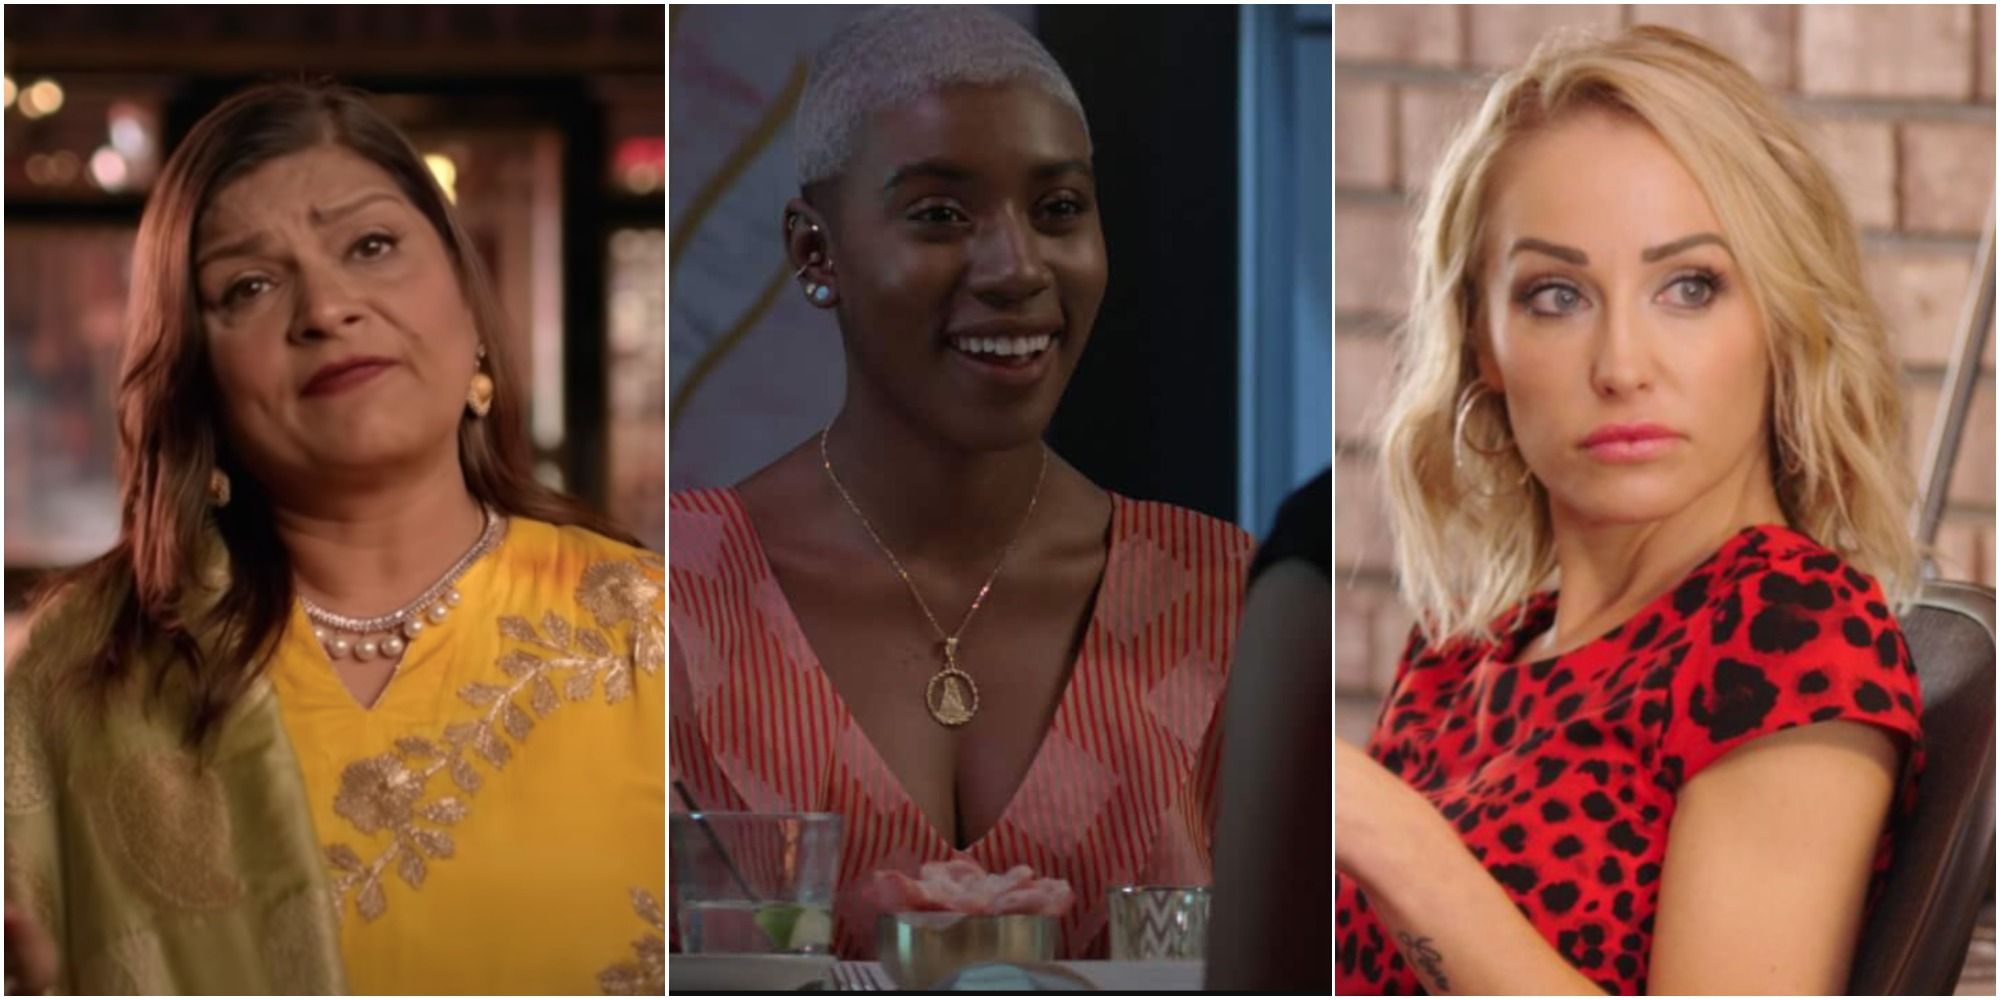 10 DramaFilled Reality Shows To Binge On Netflix Right Now